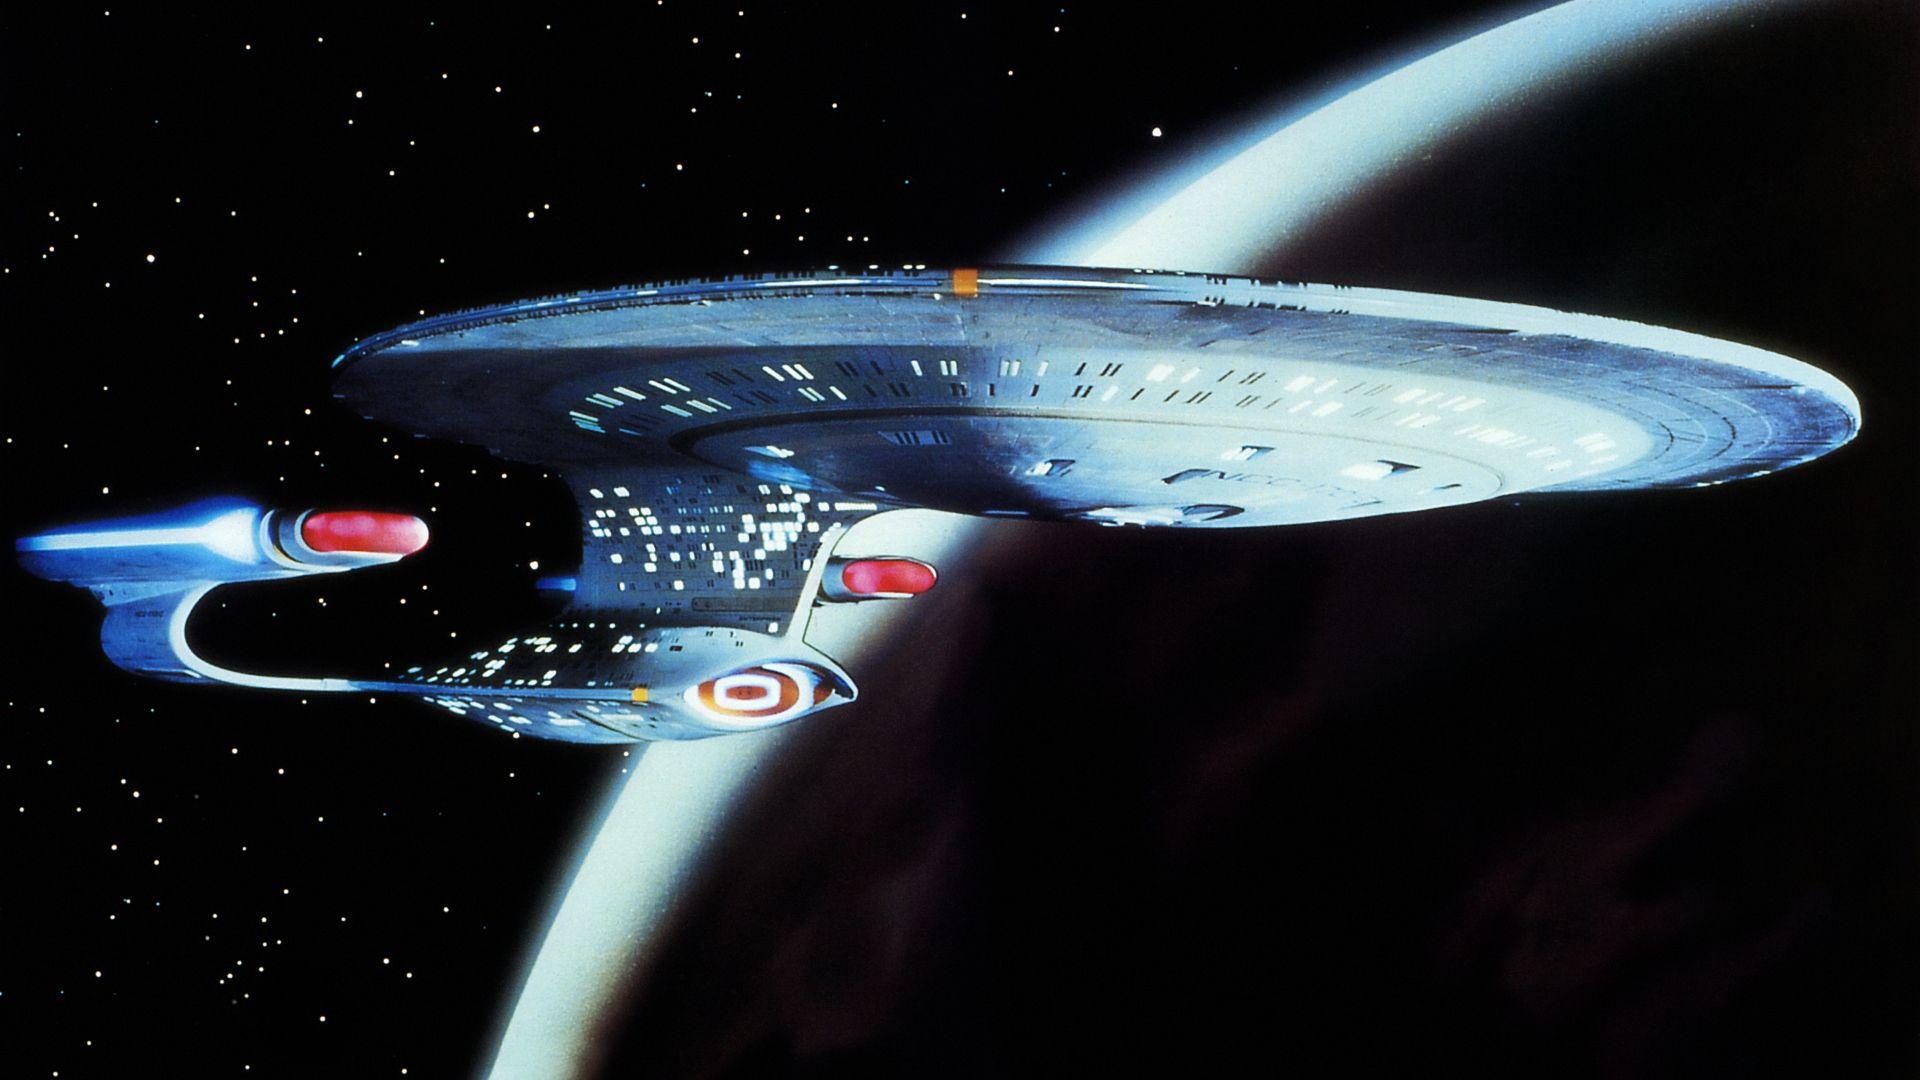 Space Wallpaper That Are Out of This World. Star trek wallpaper, Star trek, Star trek poster